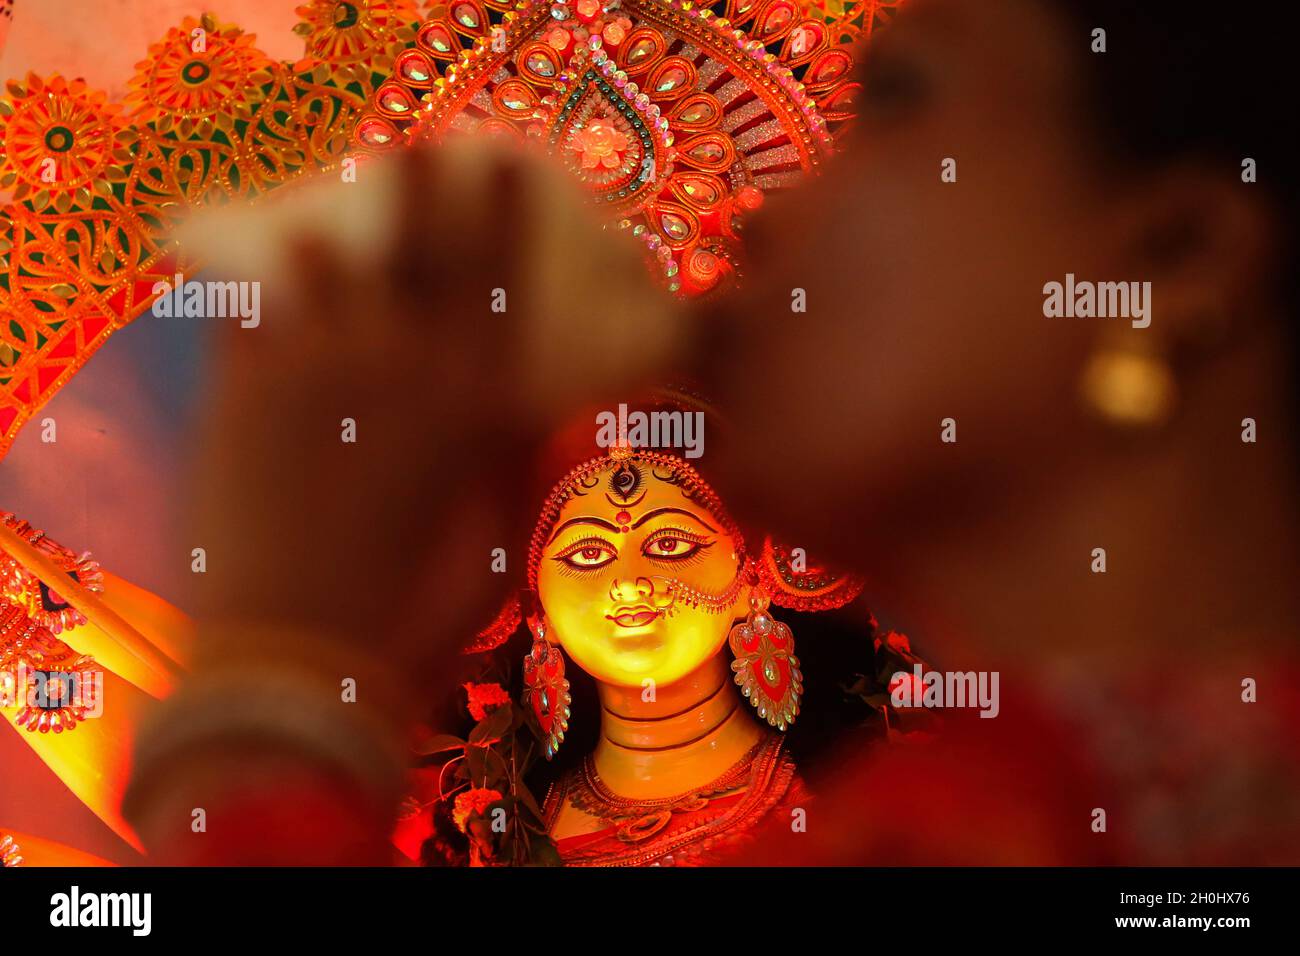 Dhaka, Bangladesh. 12th Oct, 2021. Hindu Devotee seen blowing conch shells amid the idol of Goddess Durga seen on the background during the festival.7th day of Durga puja festival known as Saptami, the biggest Hindu festival running for 9 days all over Bangladesh. Credit: SOPA Images Limited/Alamy Live News Stock Photo